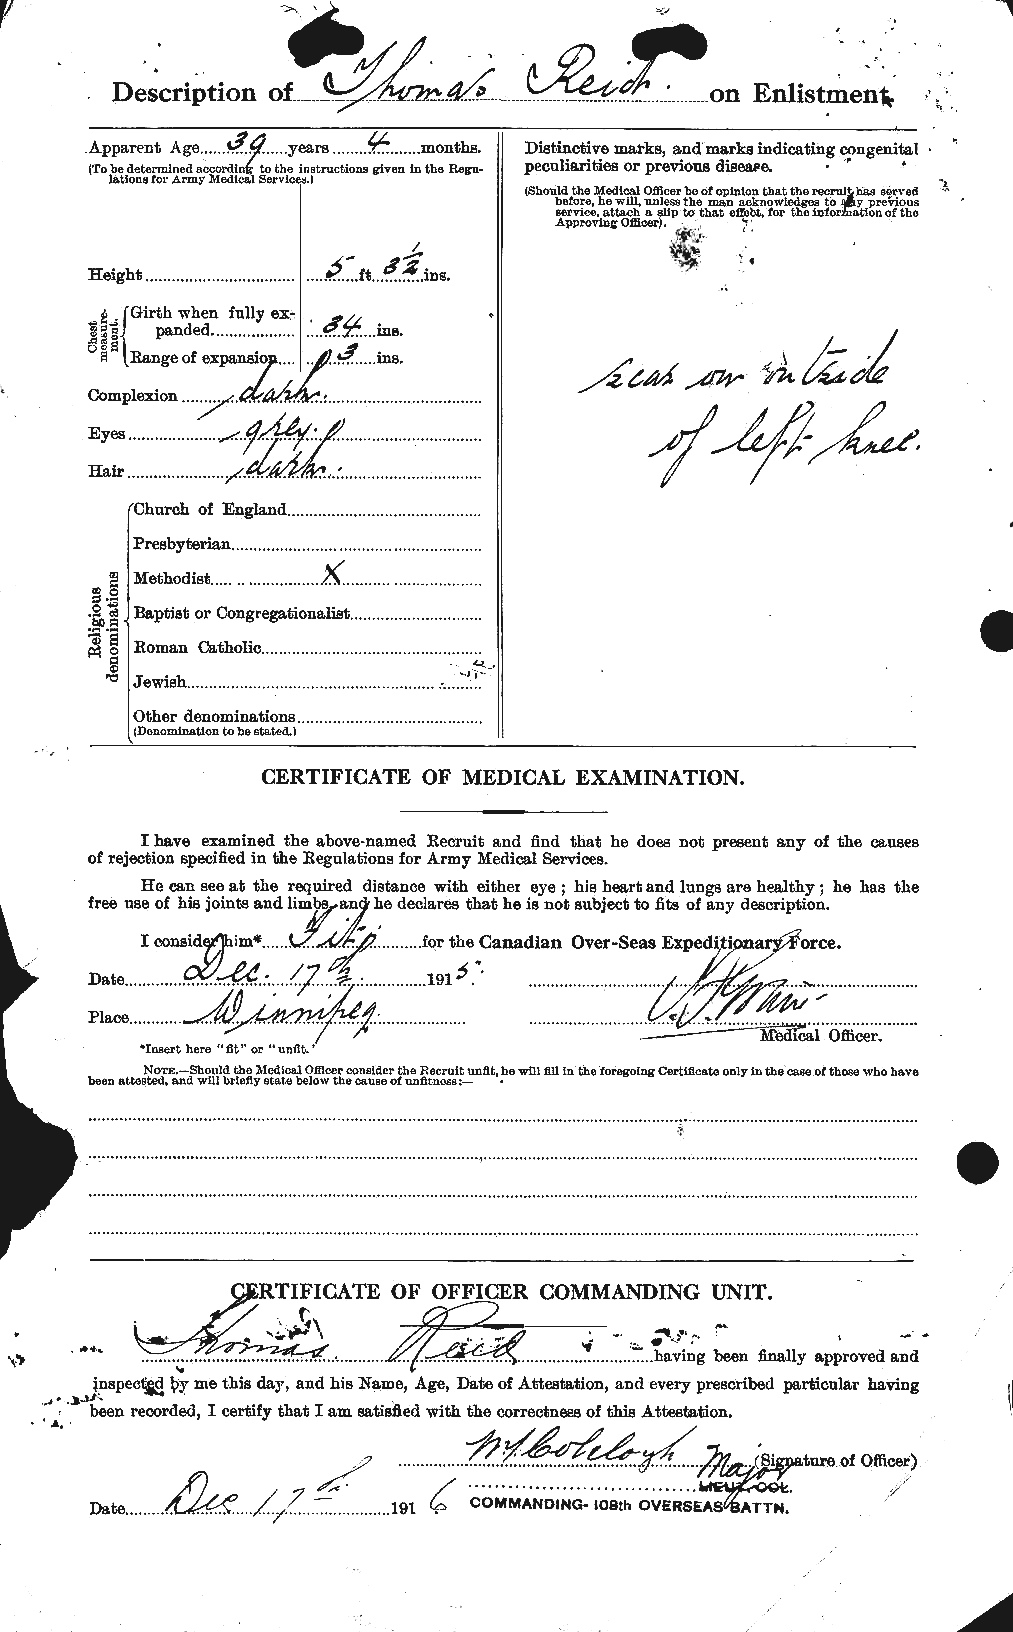 Personnel Records of the First World War - CEF 601978b